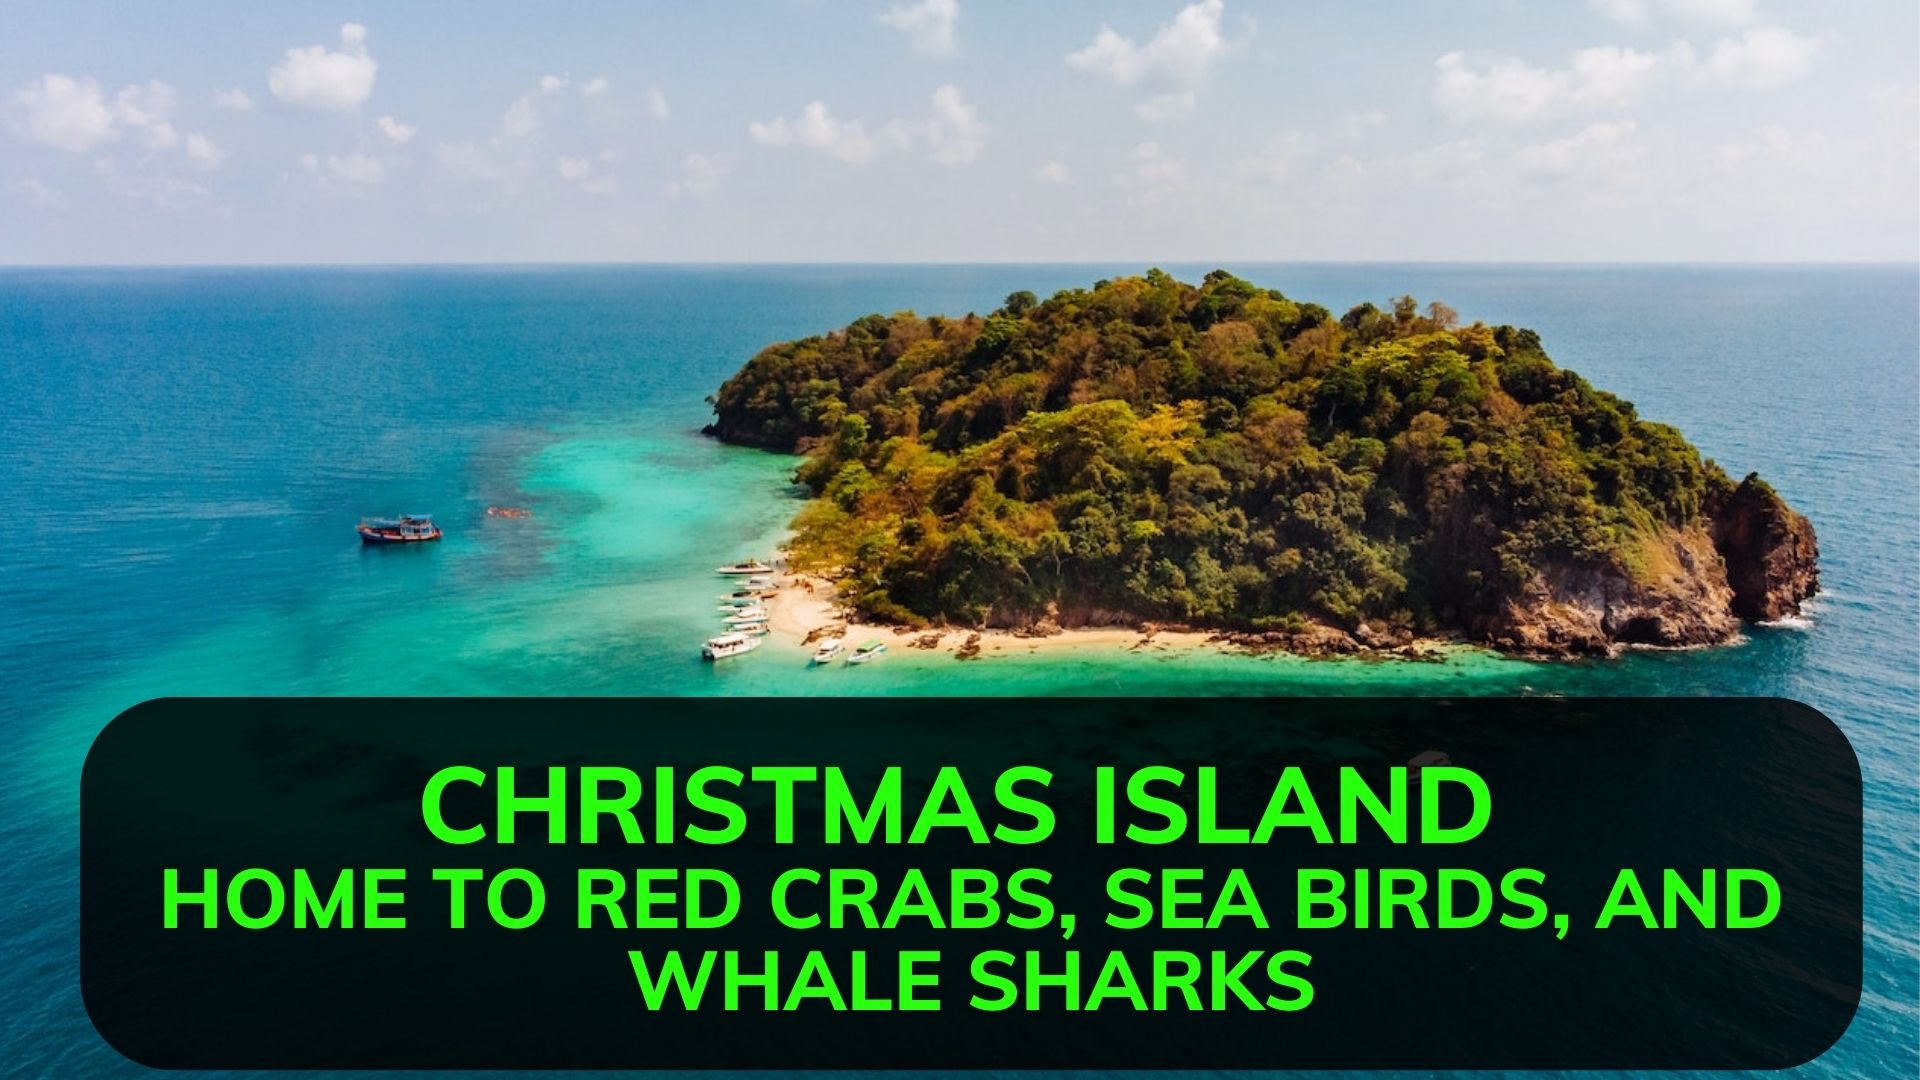 Christmas Island - Home To Red Crabs, Sea Birds, And Whale Sharks